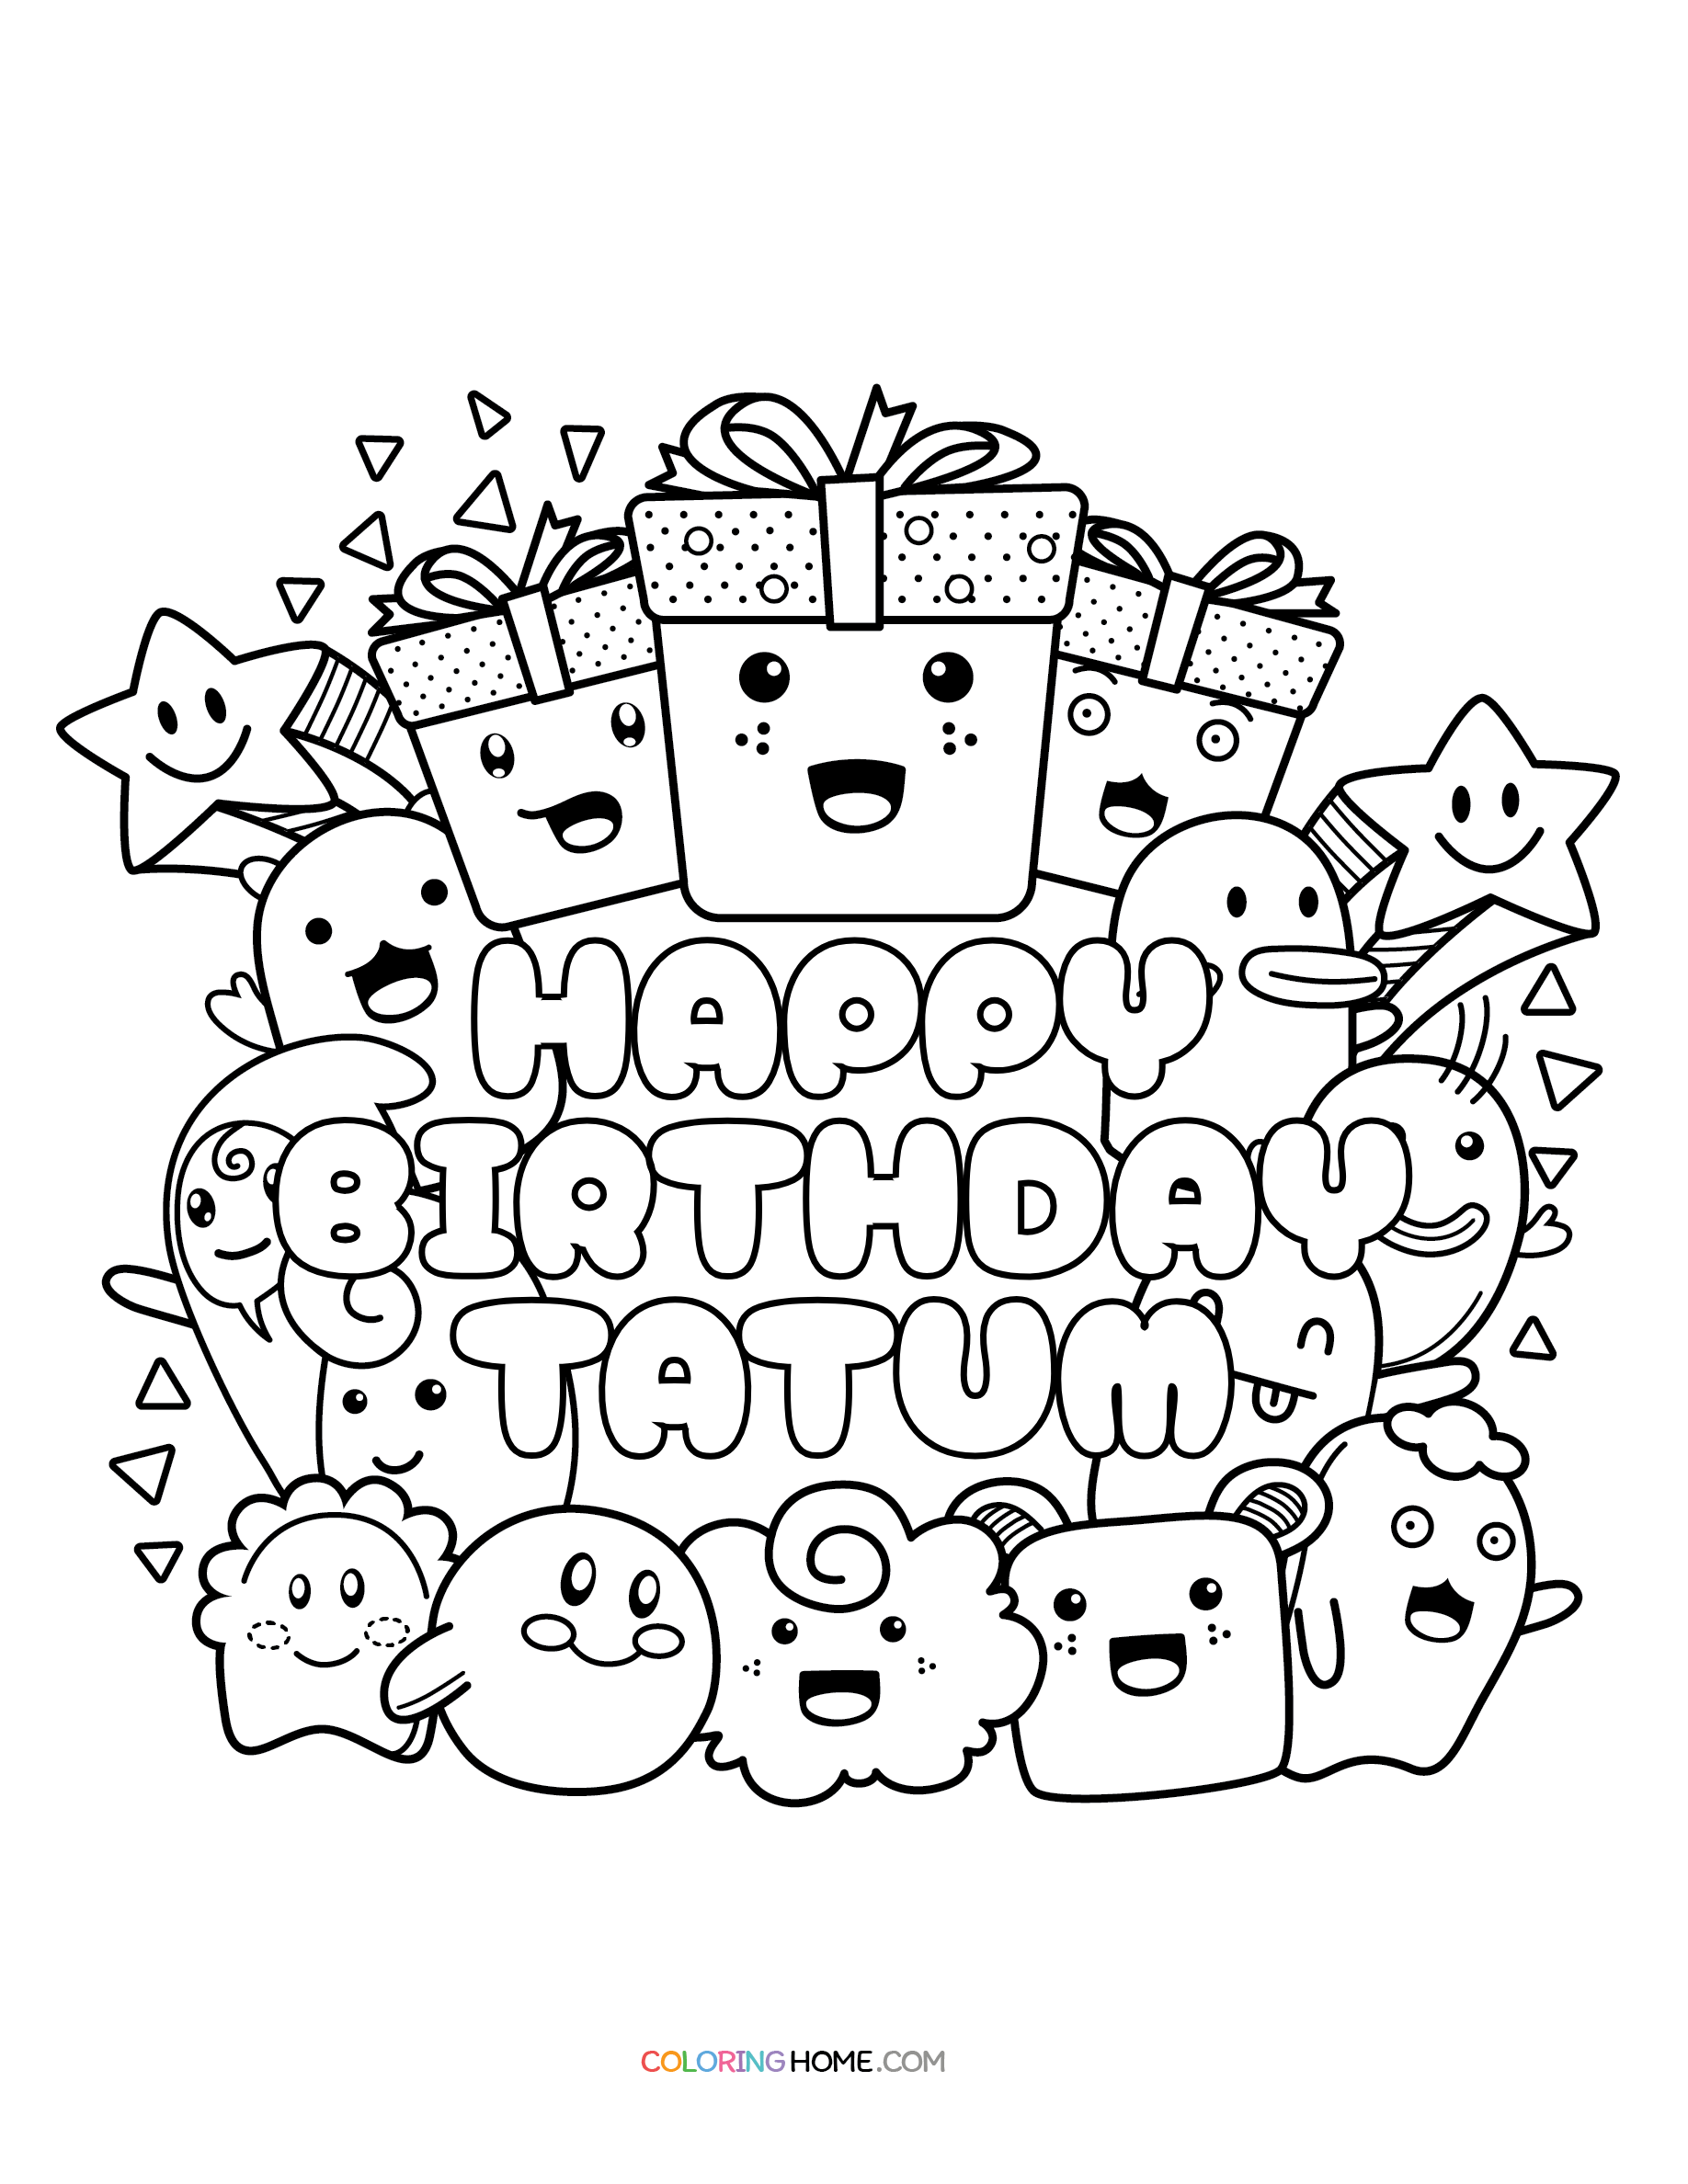 Tatum Name Coloring Pages - Coloring Nation